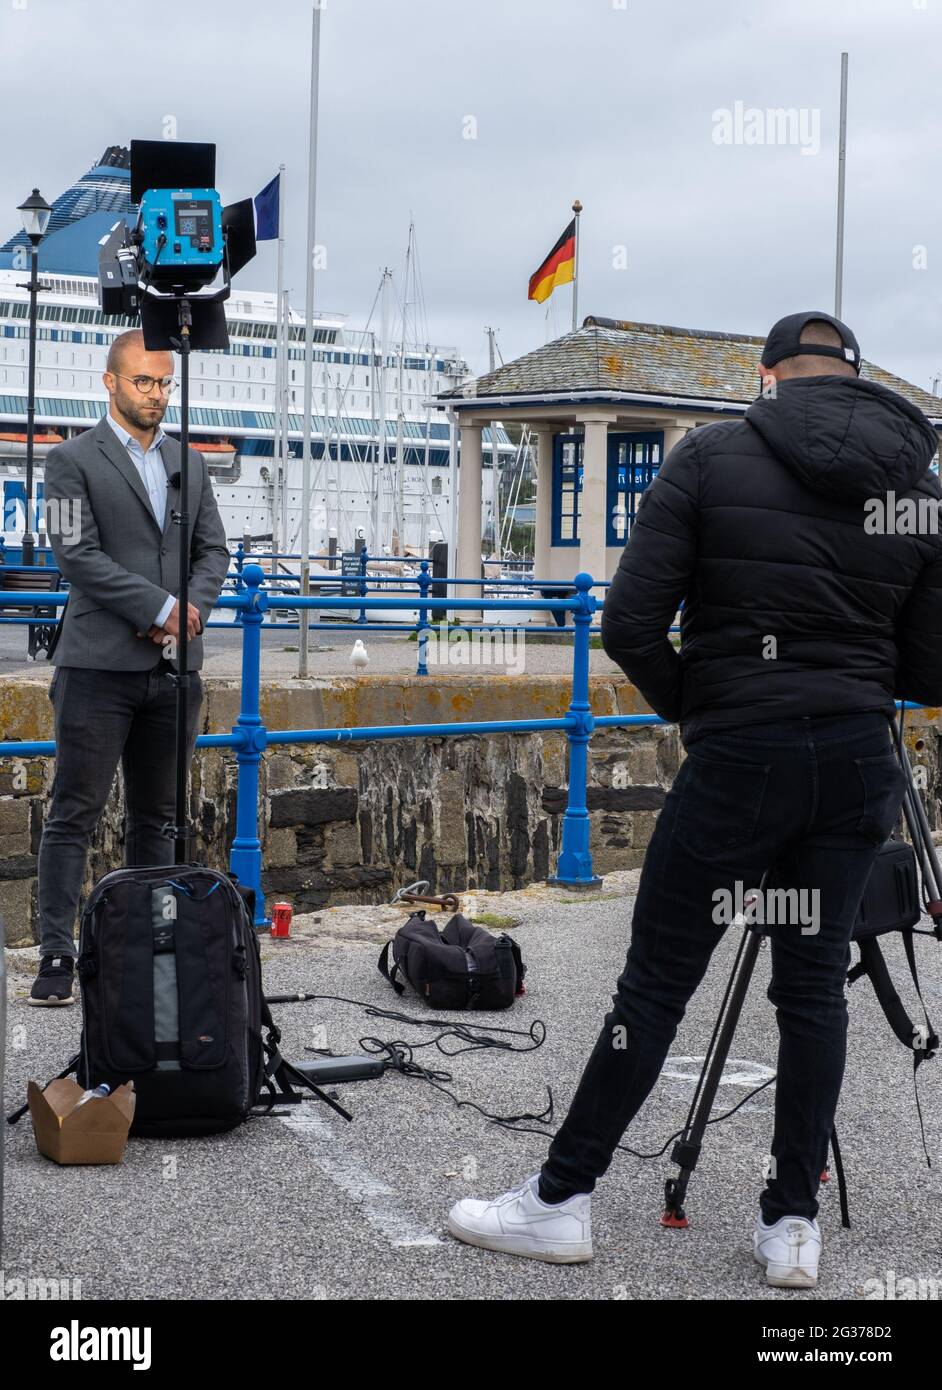 News reporters talking to camera and interviewing with their cameraman as they cover the protests and stories from the G7 Summit in Falmouth Stock Photo